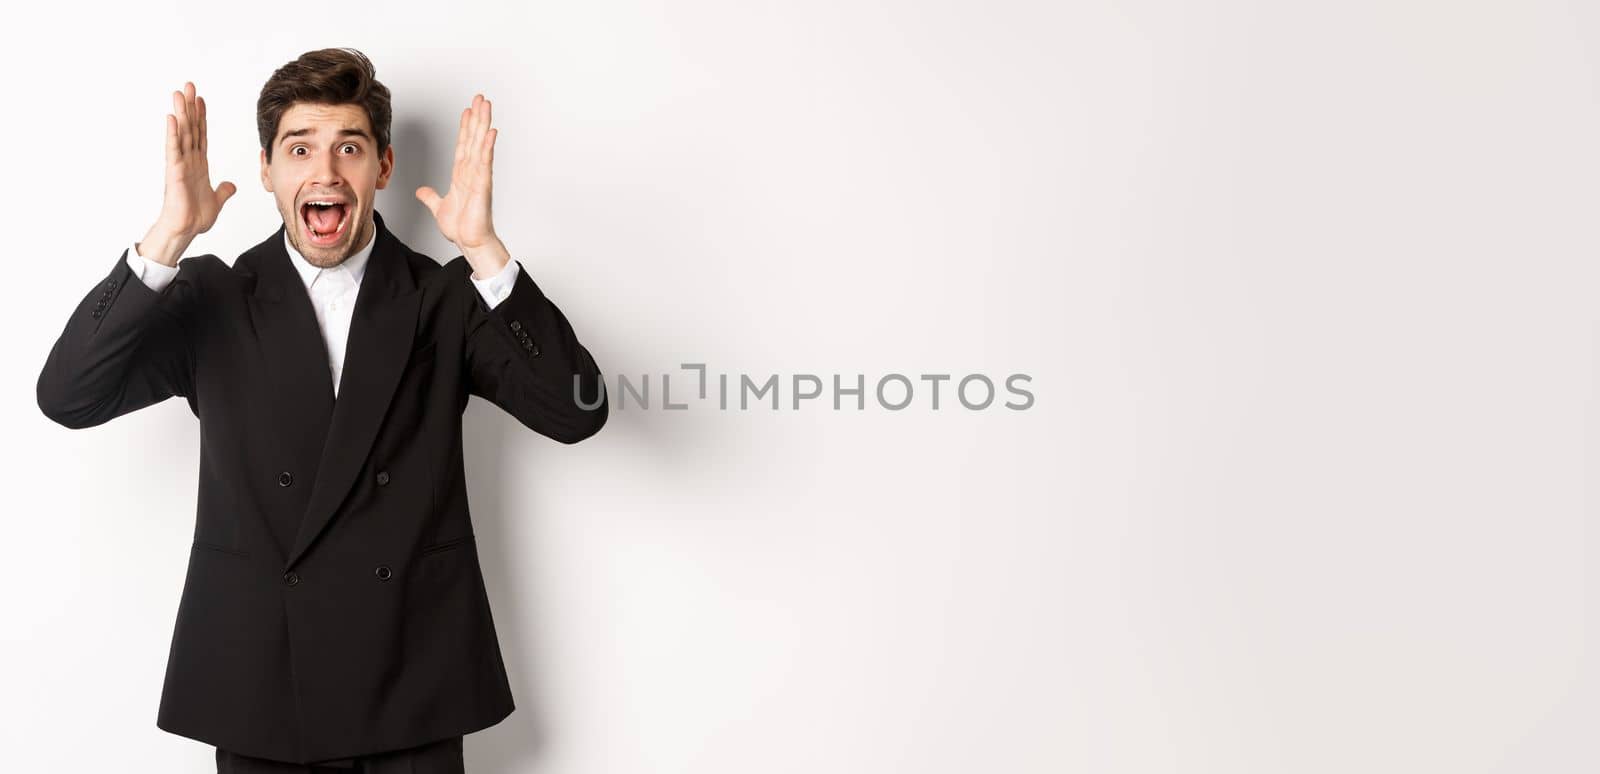 Frustrated and concerned man in black suit, screaming in panic and looking at something shocking, standing over white background.